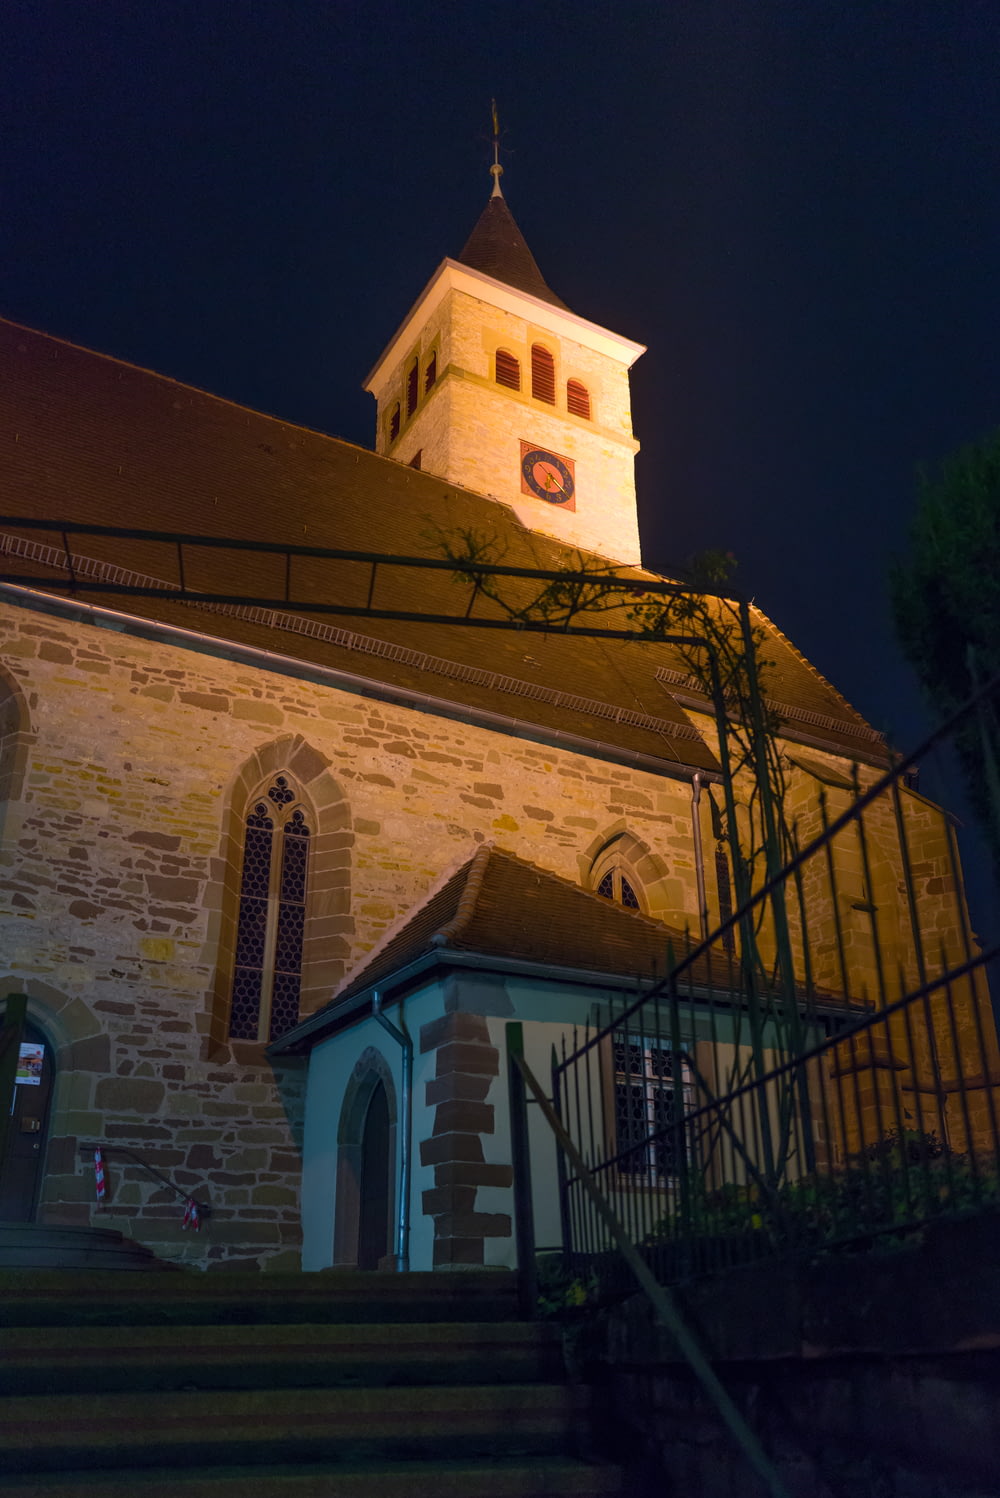 a church with a steeple lit up at night